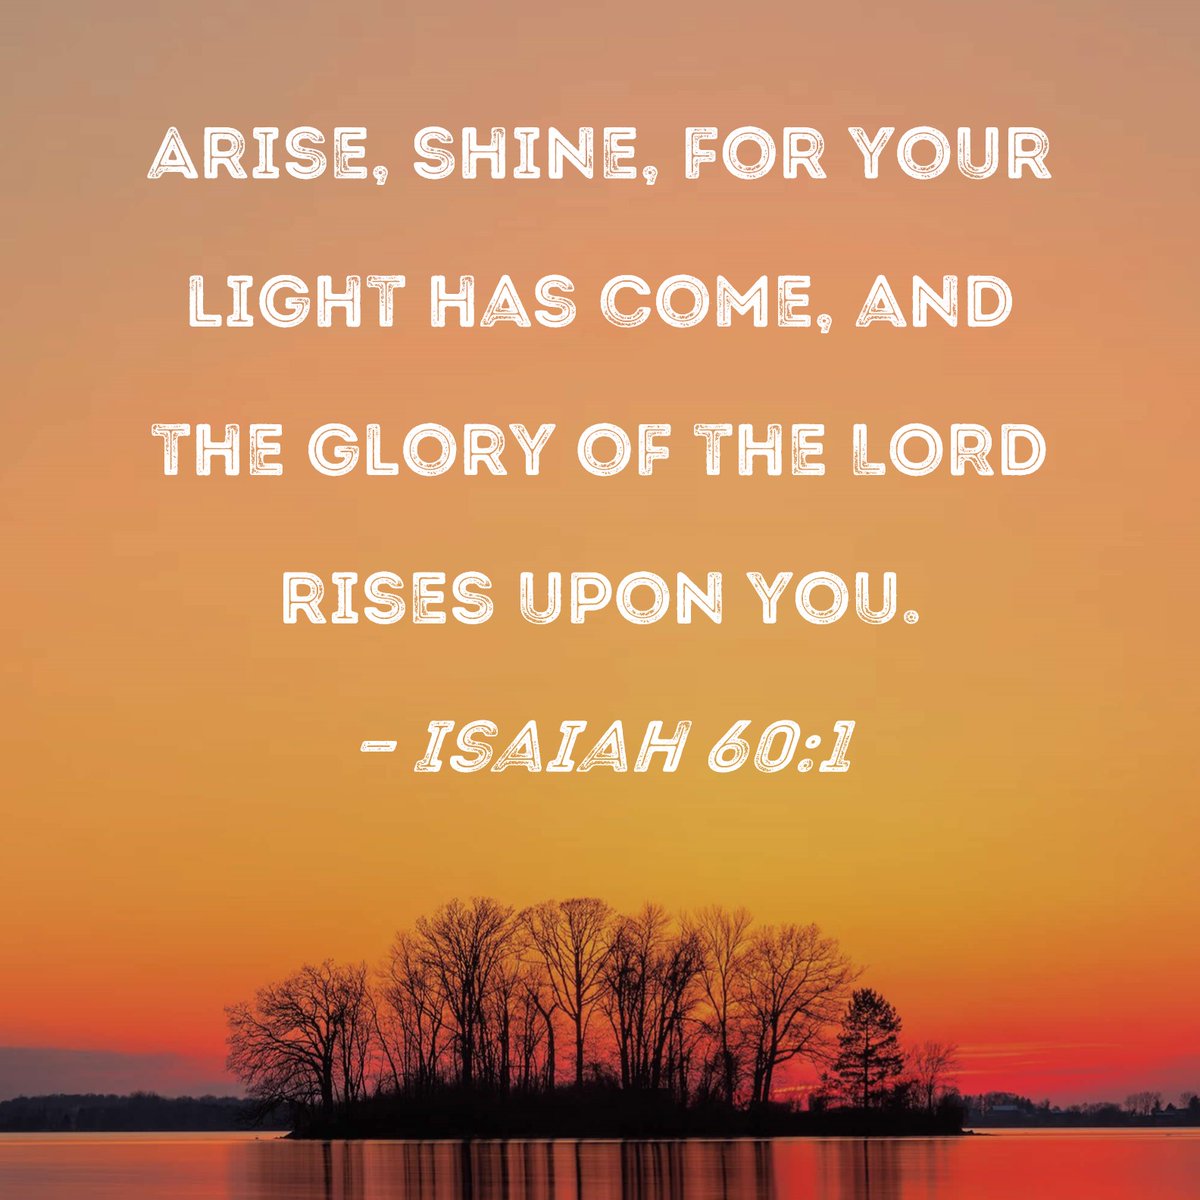 Arise and Shine today! Shake off every spirit of lack, poverty, infirmity in your body! Your season of goodness, blessings and overflow is here!